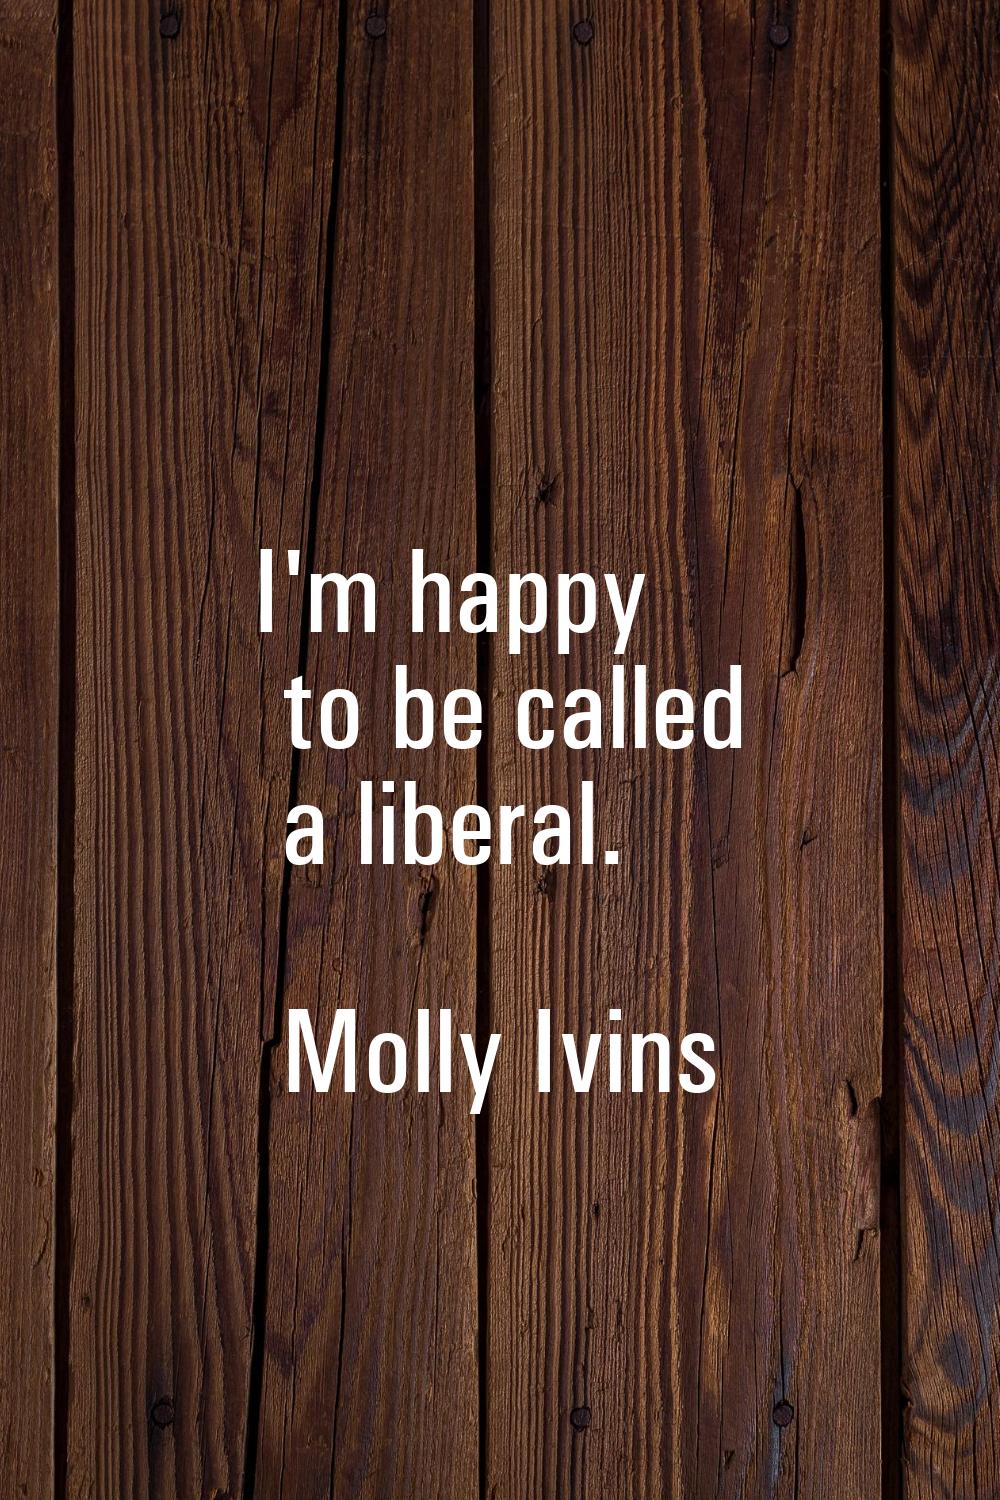 I'm happy to be called a liberal.